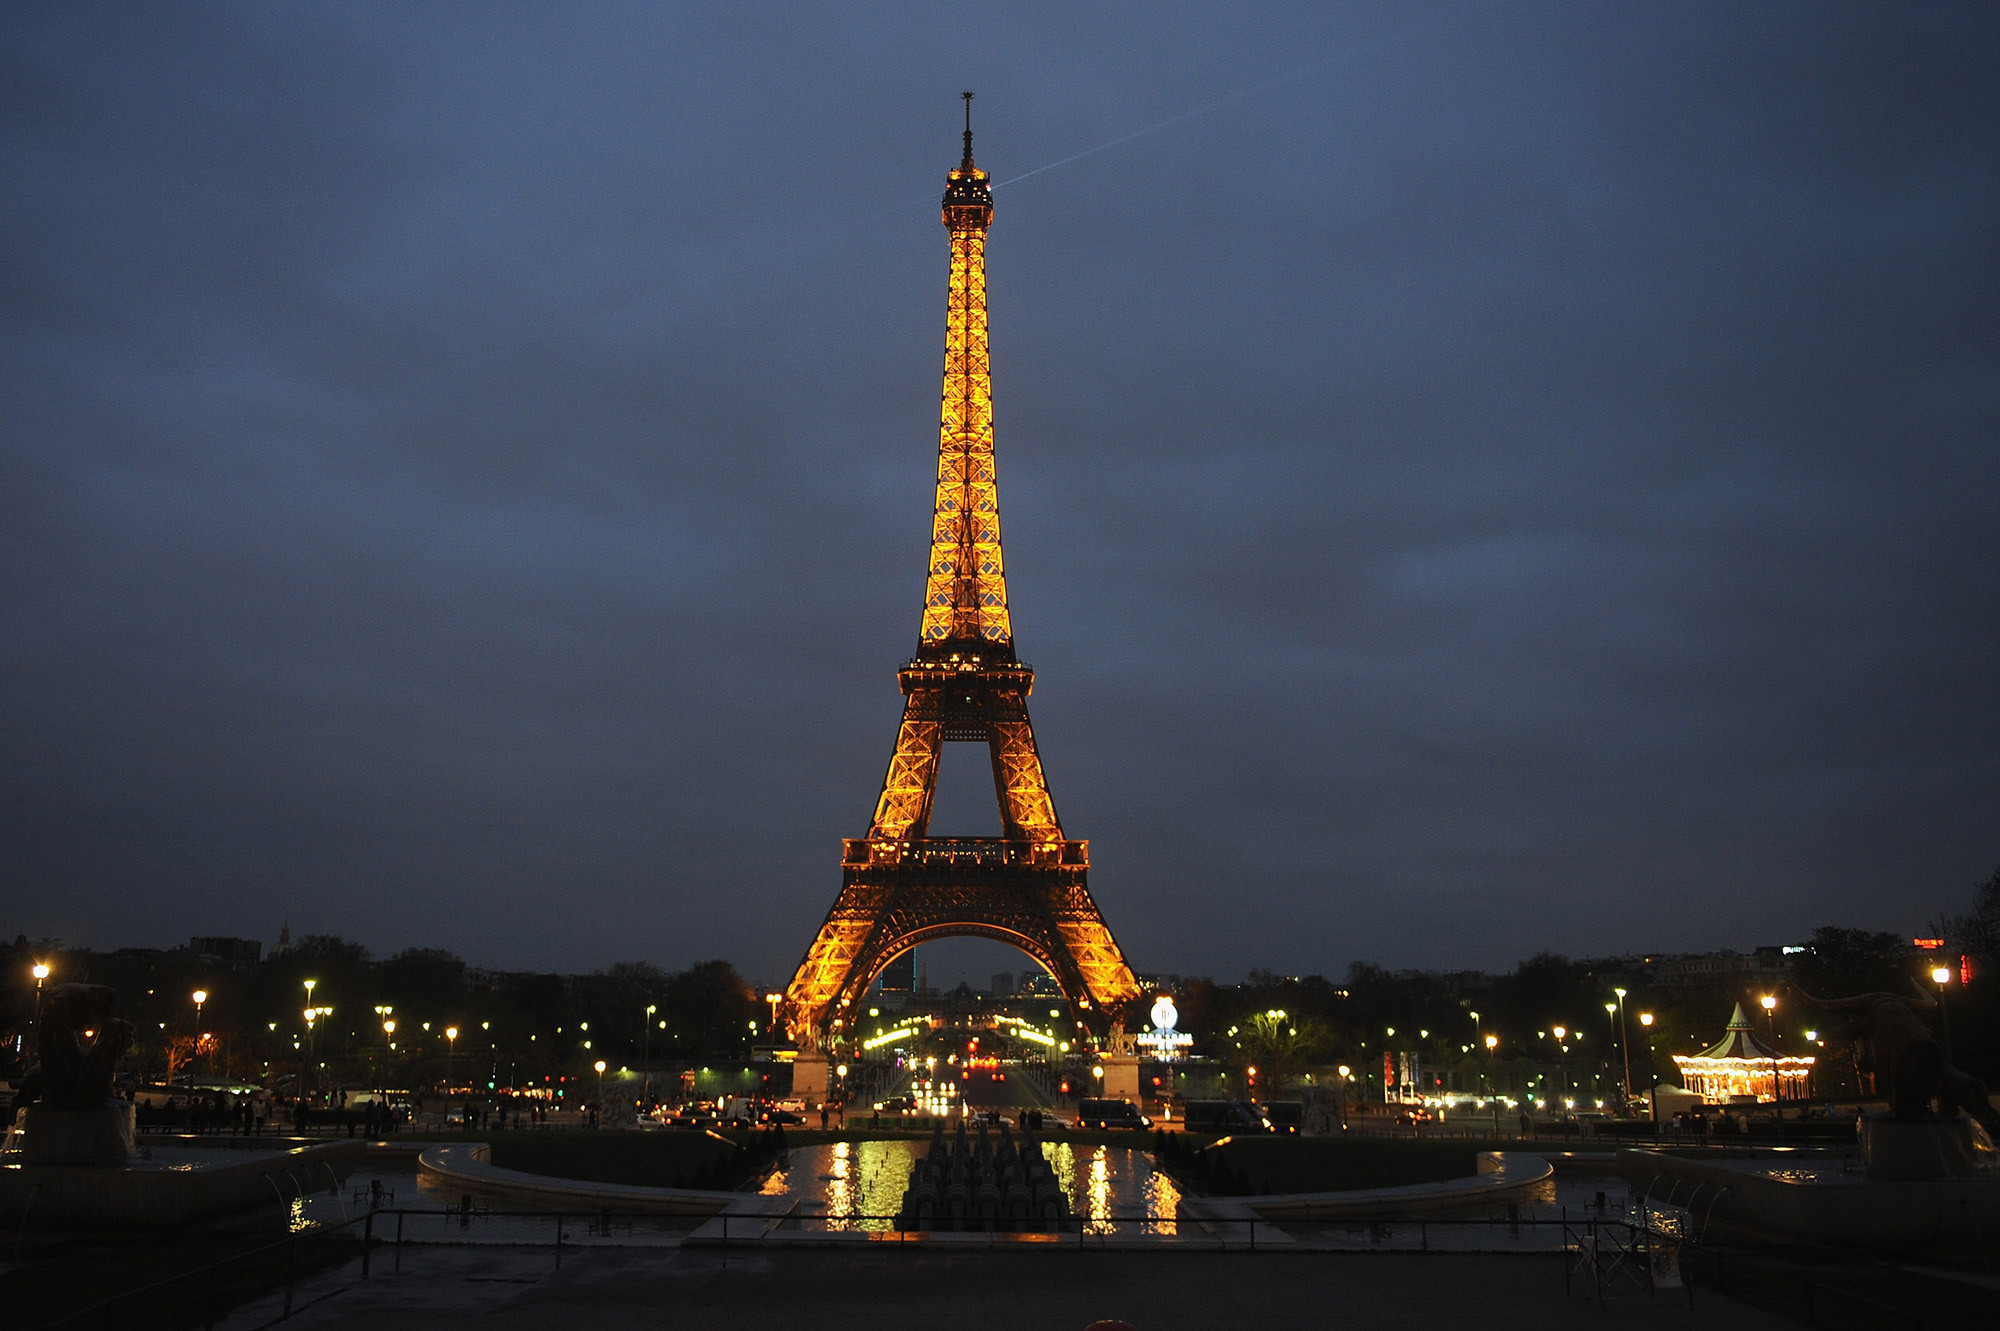 Did you know it's illegal to take pics of the Eiffel Tower at night?